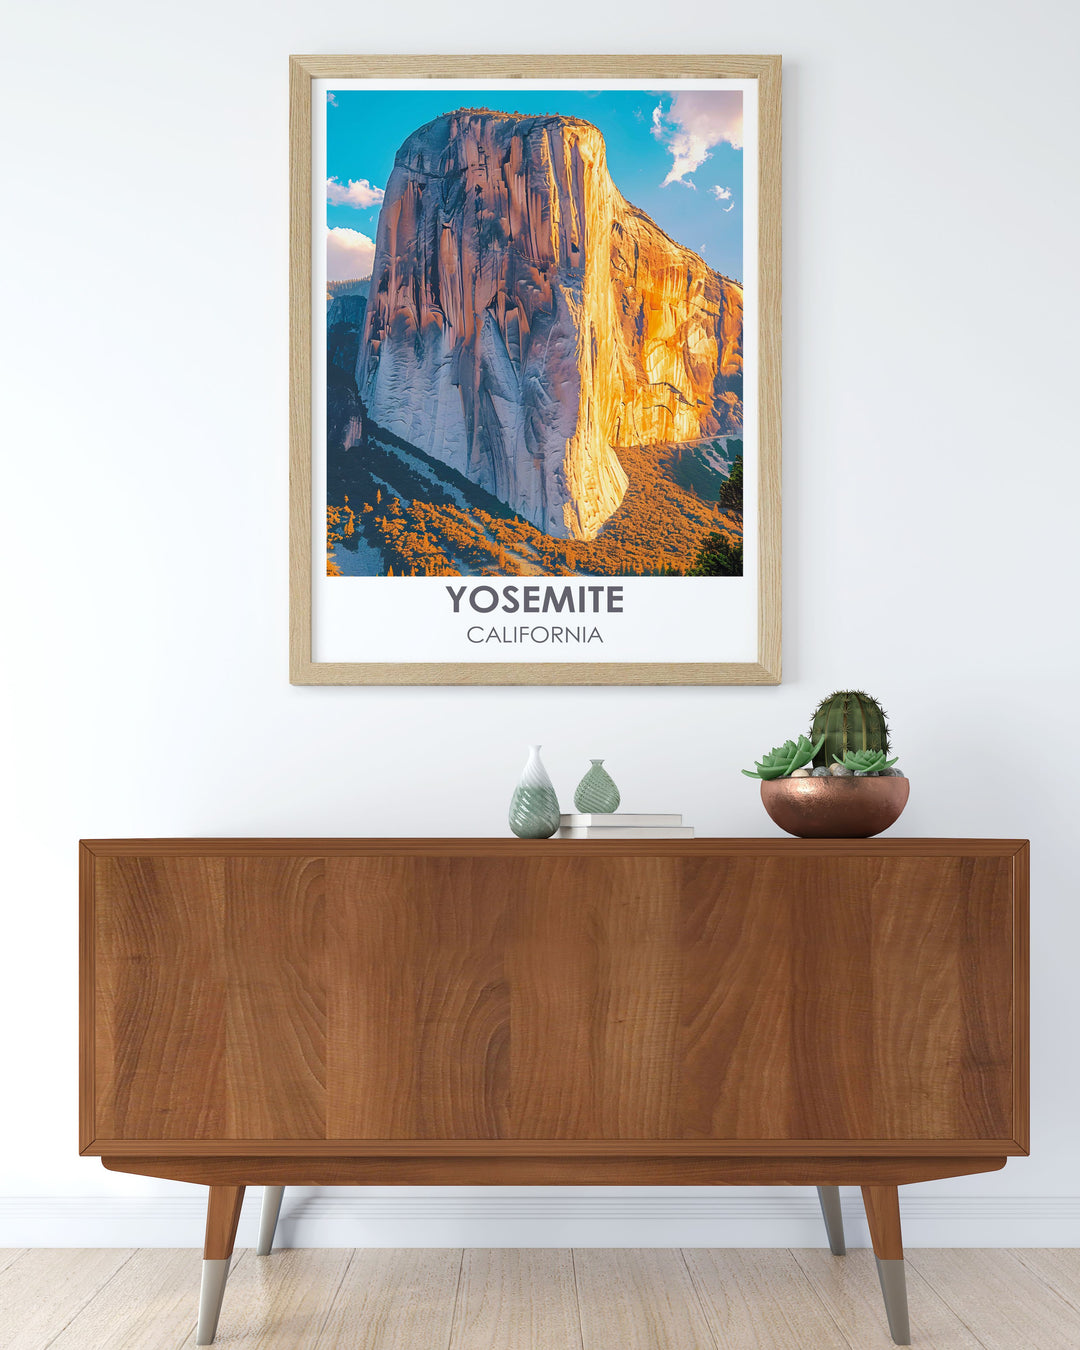 Showcasing the enchanting Half Dome in Yosemite, this poster captures the striking silhouette and panoramic views, perfect for those who dream of exploring this iconic hiking destination.